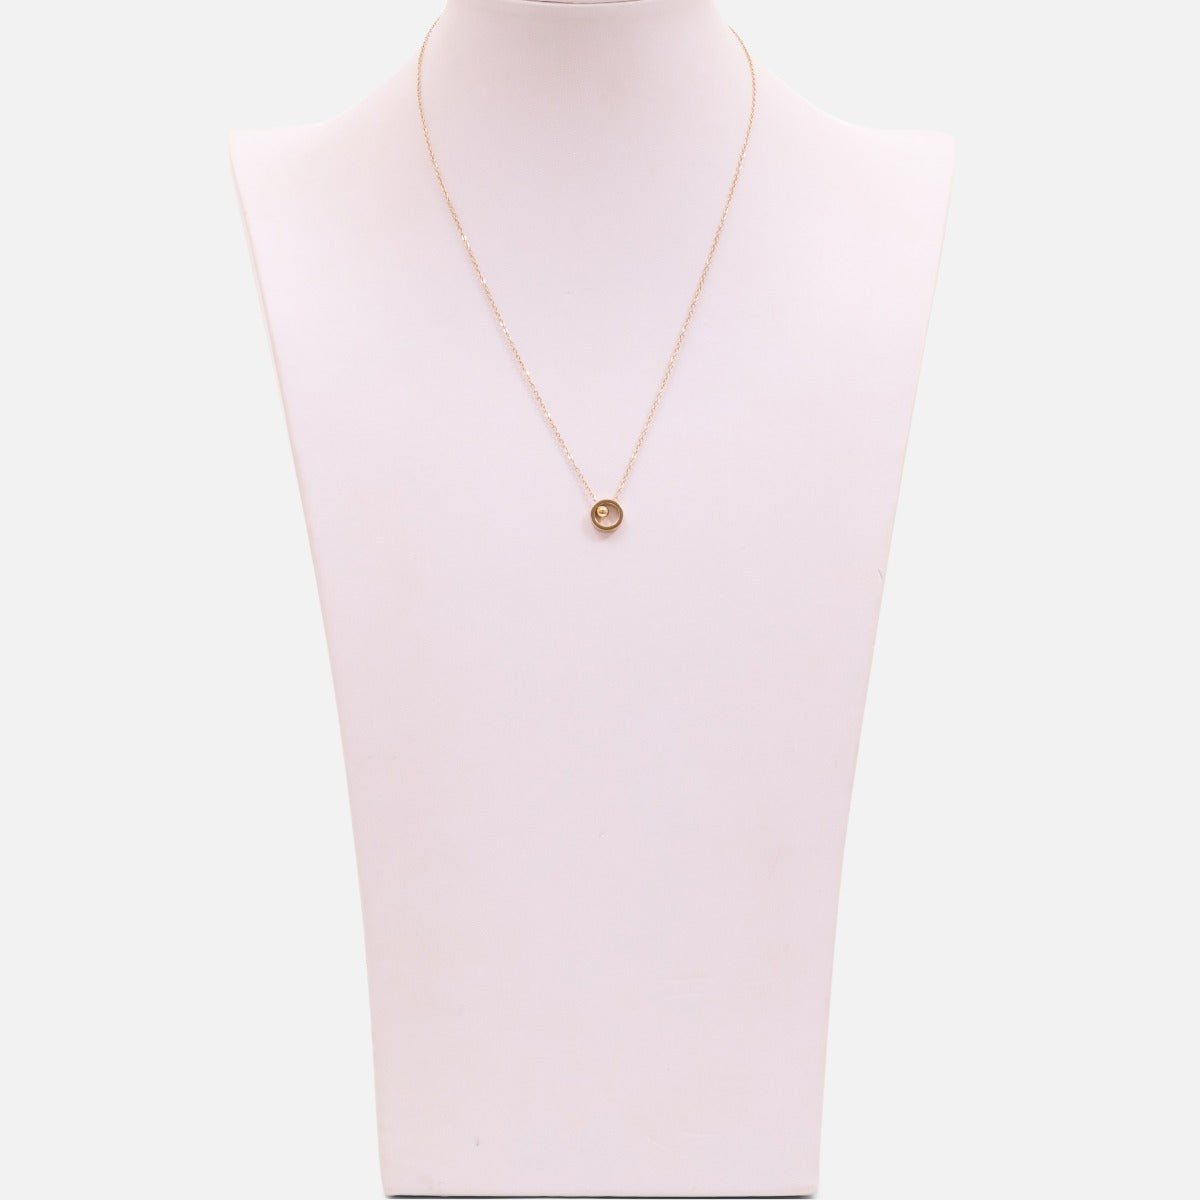 Golden stainless steel necklace with small round charm and bead